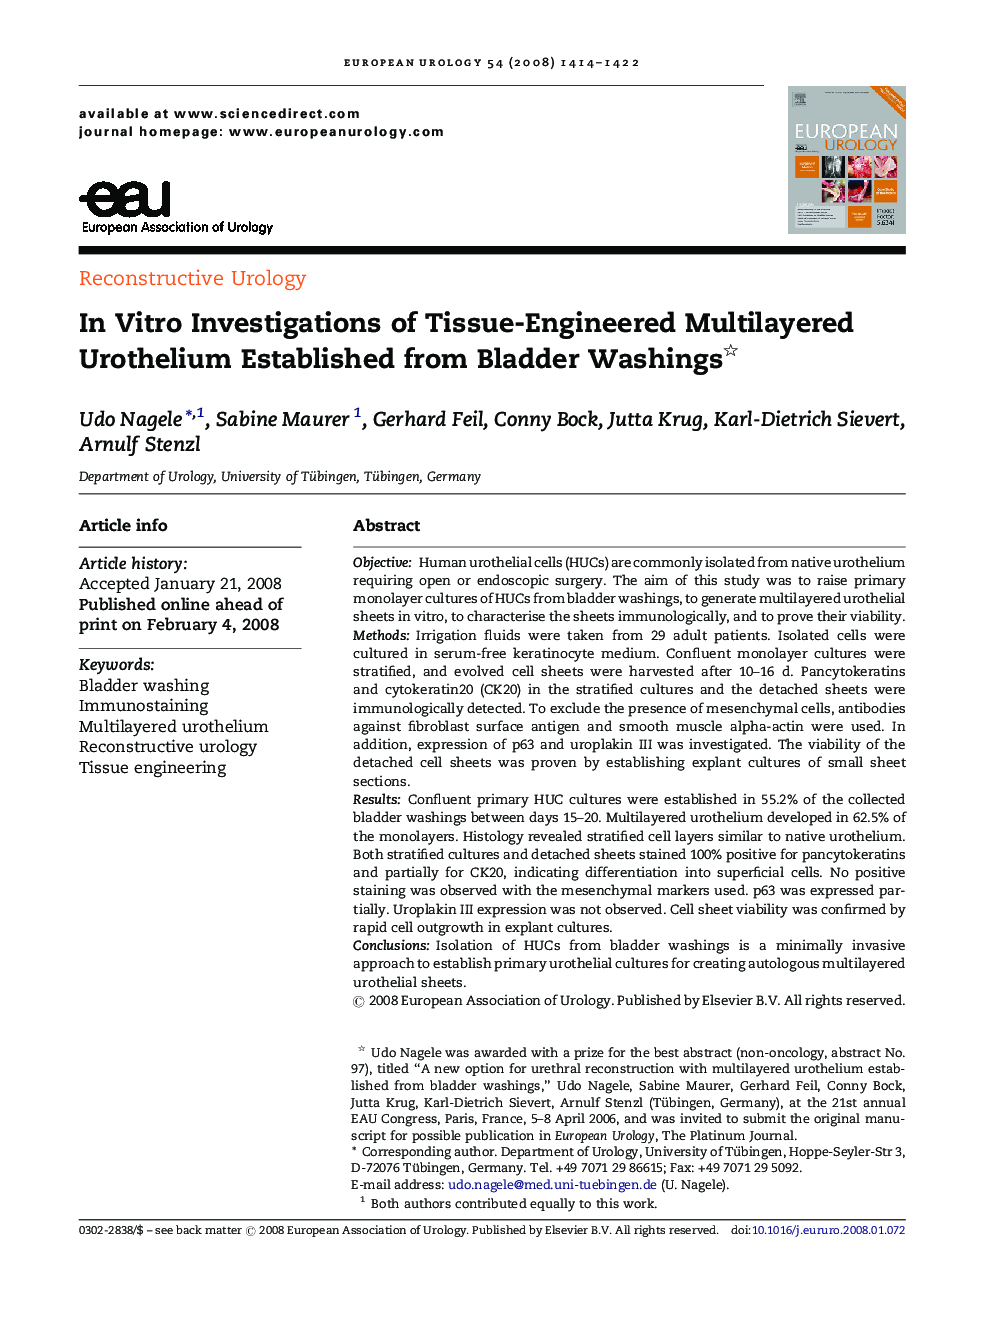 In Vitro Investigations of Tissue-Engineered Multilayered Urothelium Established from Bladder Washings 